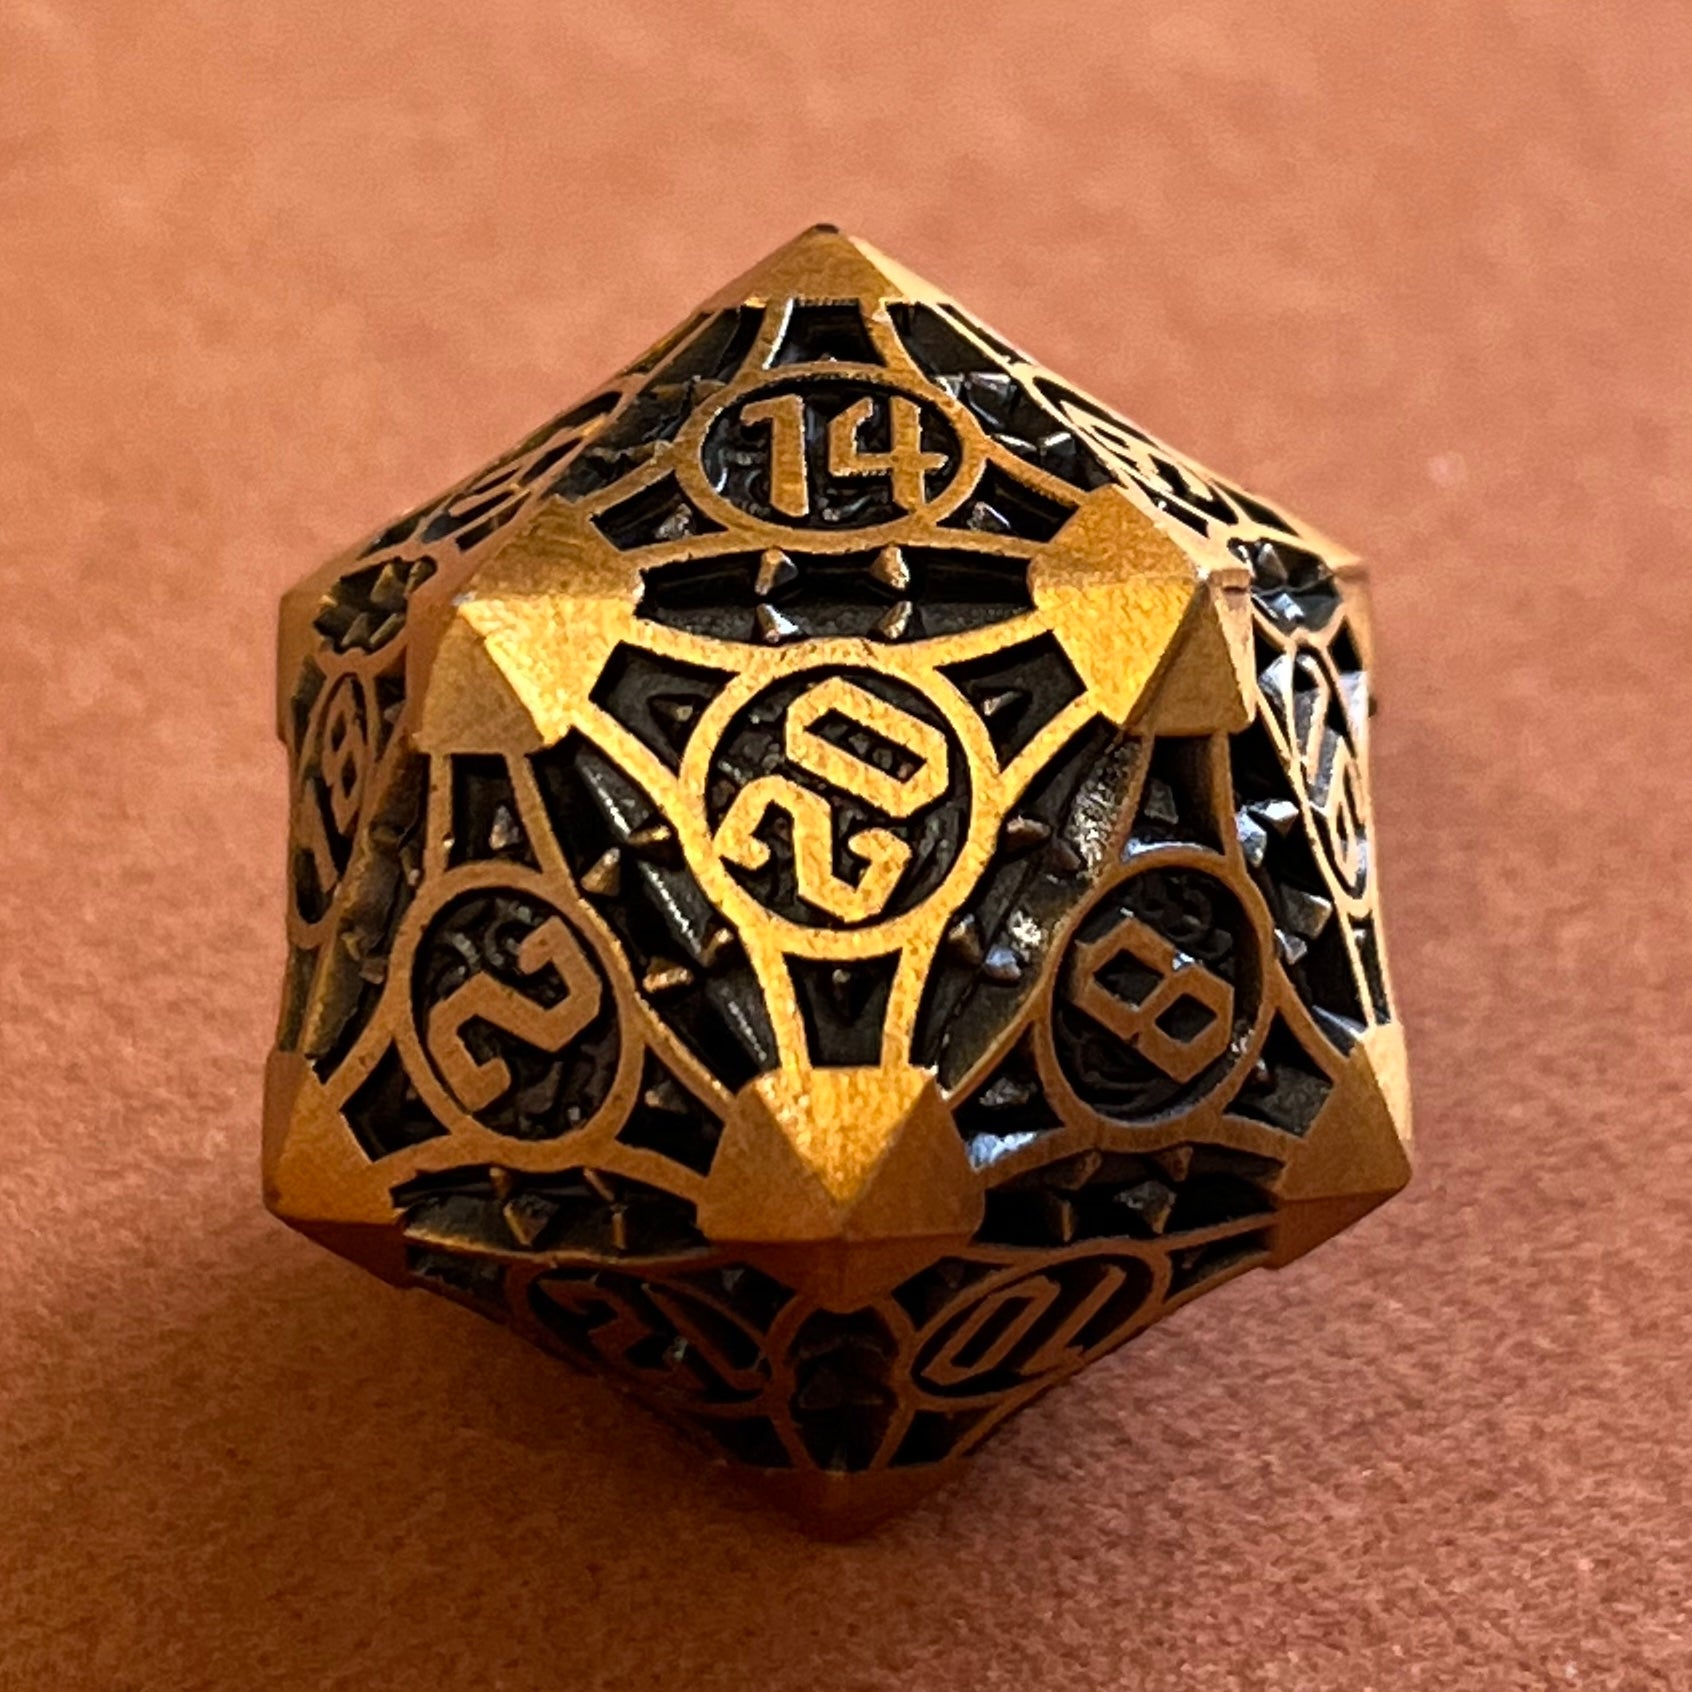 Metal DnD dice sets, TTRPG, role-playing games, DnD dice, polyhedral dice, shiny math rocks